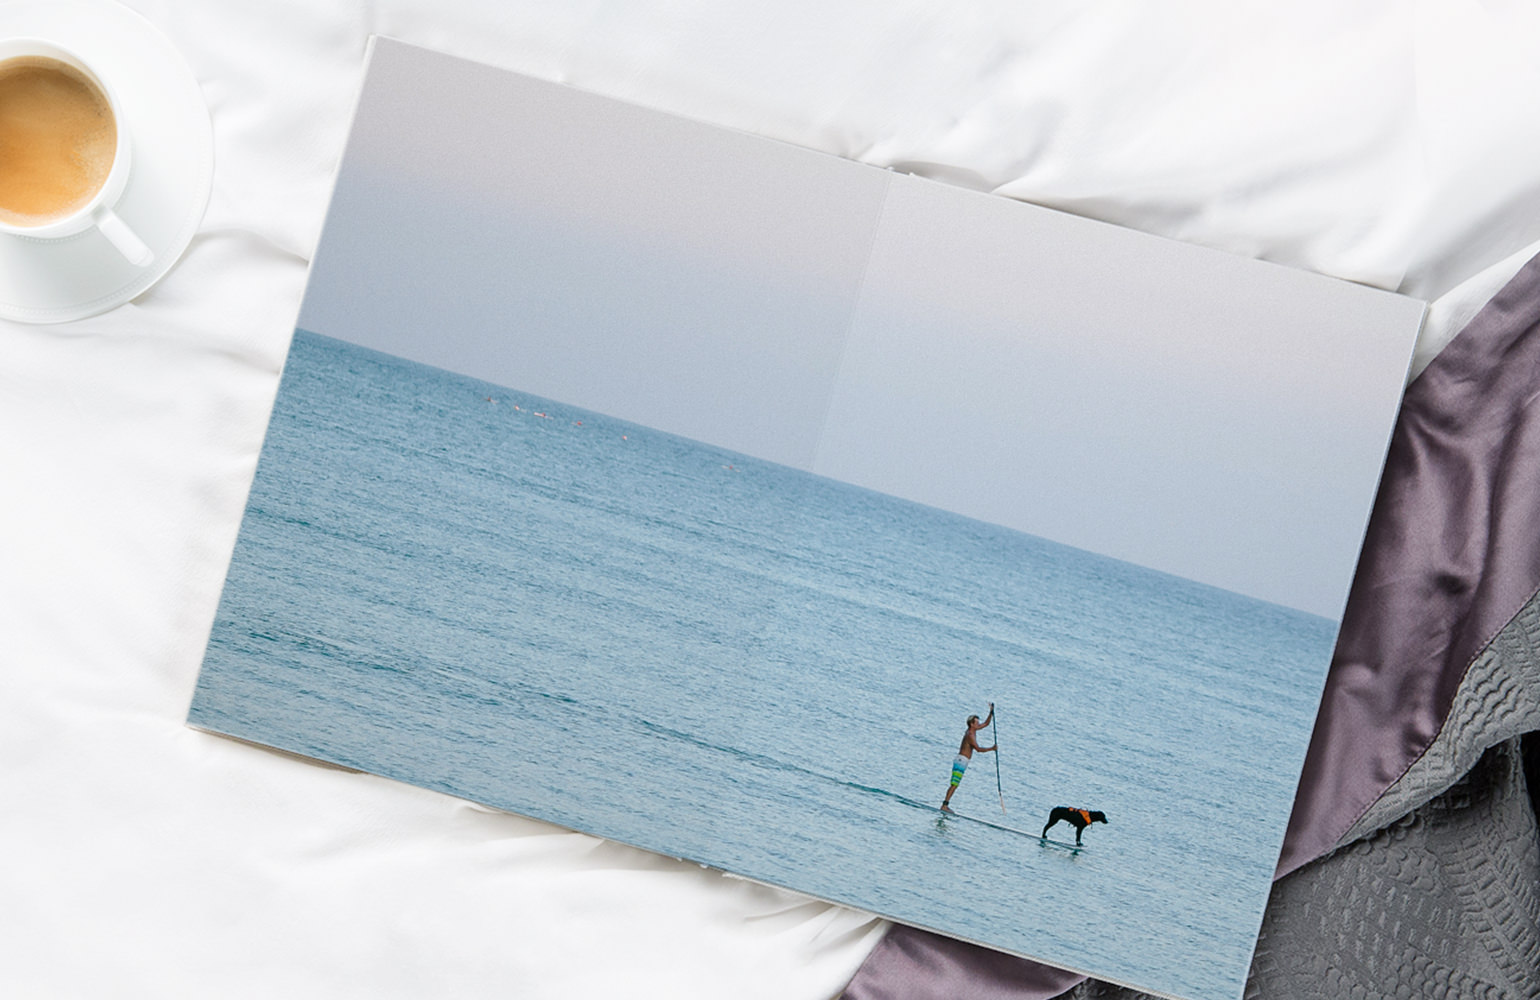 Portrait photo album laying on bed open to a double page spread of man paddle boarding with dog